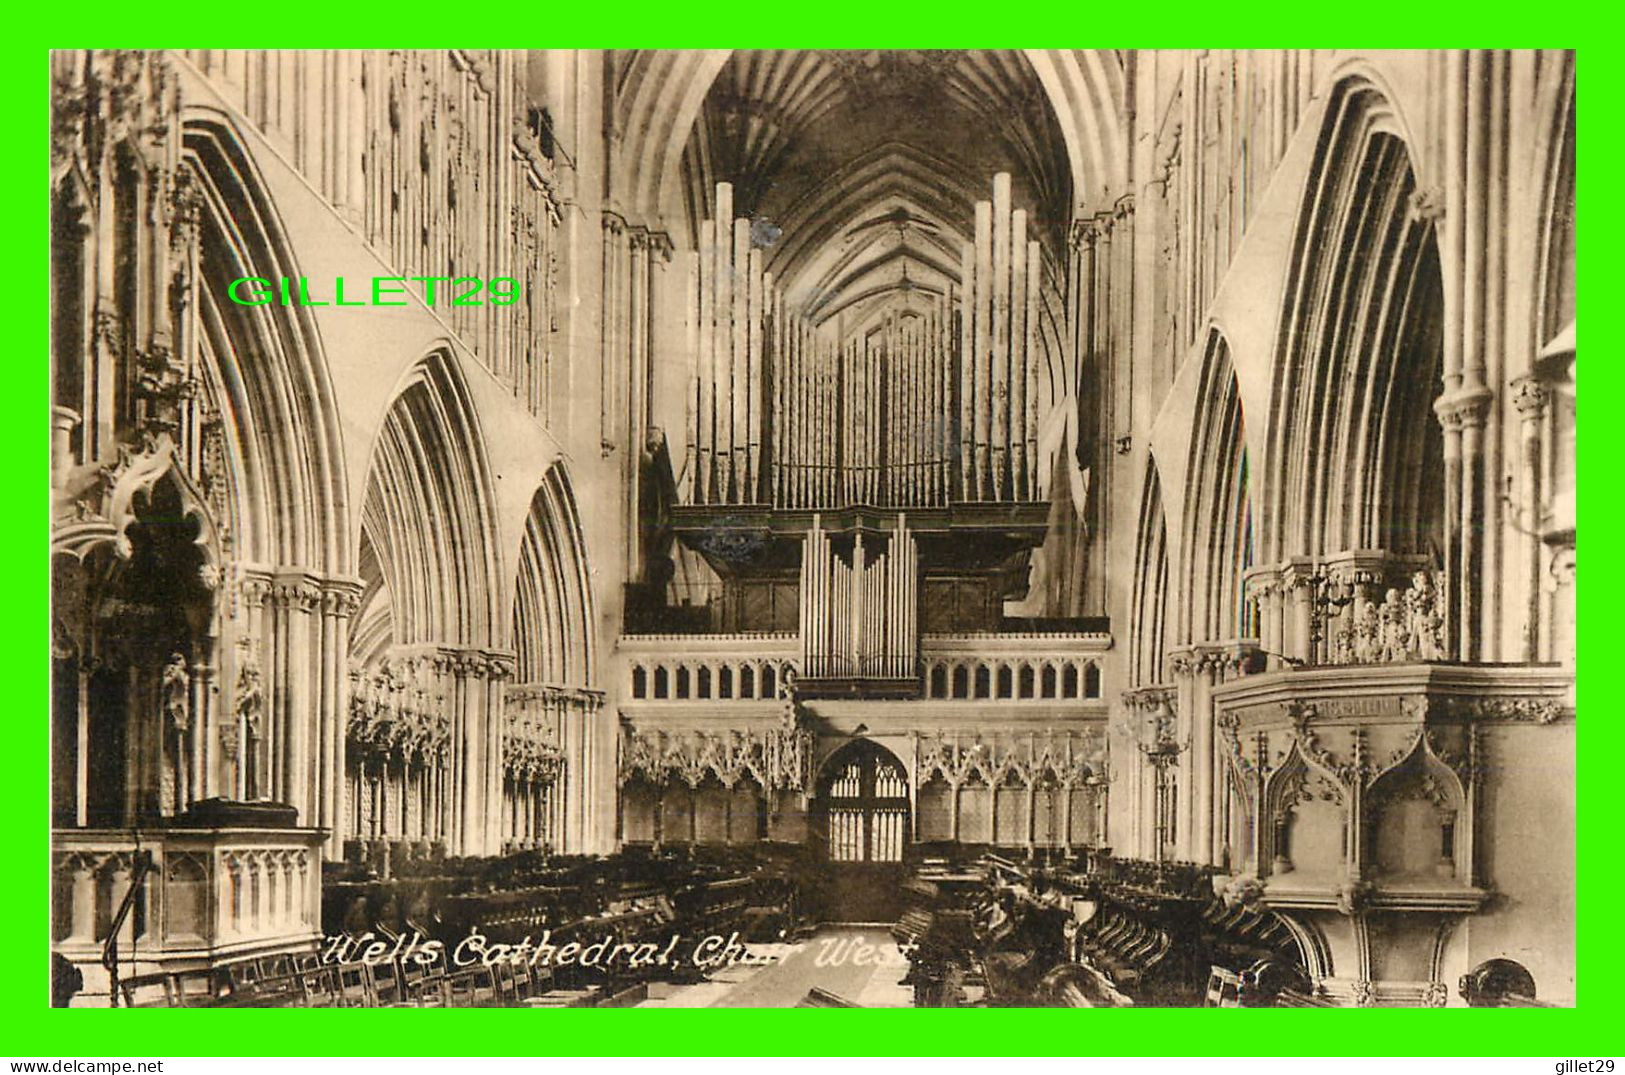 WELLS, SOMERET, UK - INTERIOR OF THE CATHEDRAL, CHAIR WEST - PUB. BY T.W. PHILLIPS CITY STUDIO No 73999 - - Wells